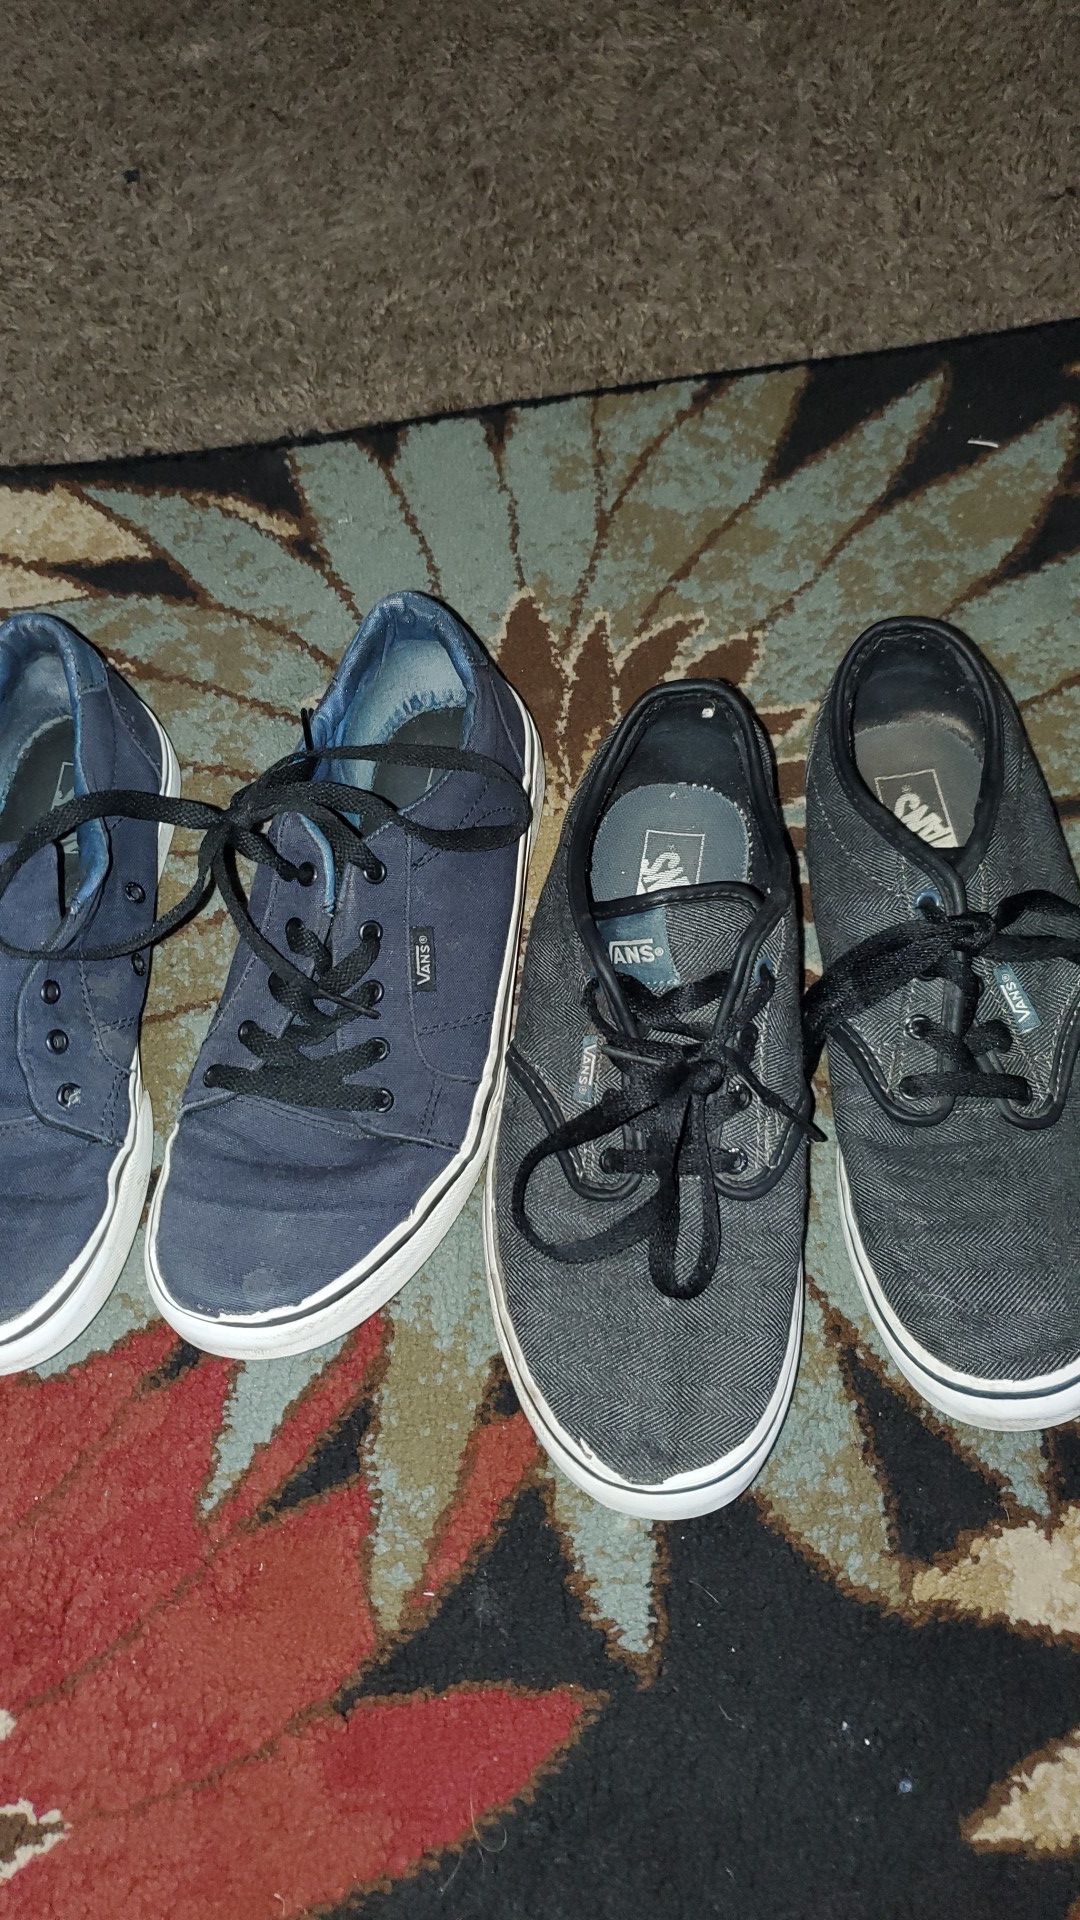 Van's size 5 take them both for 10